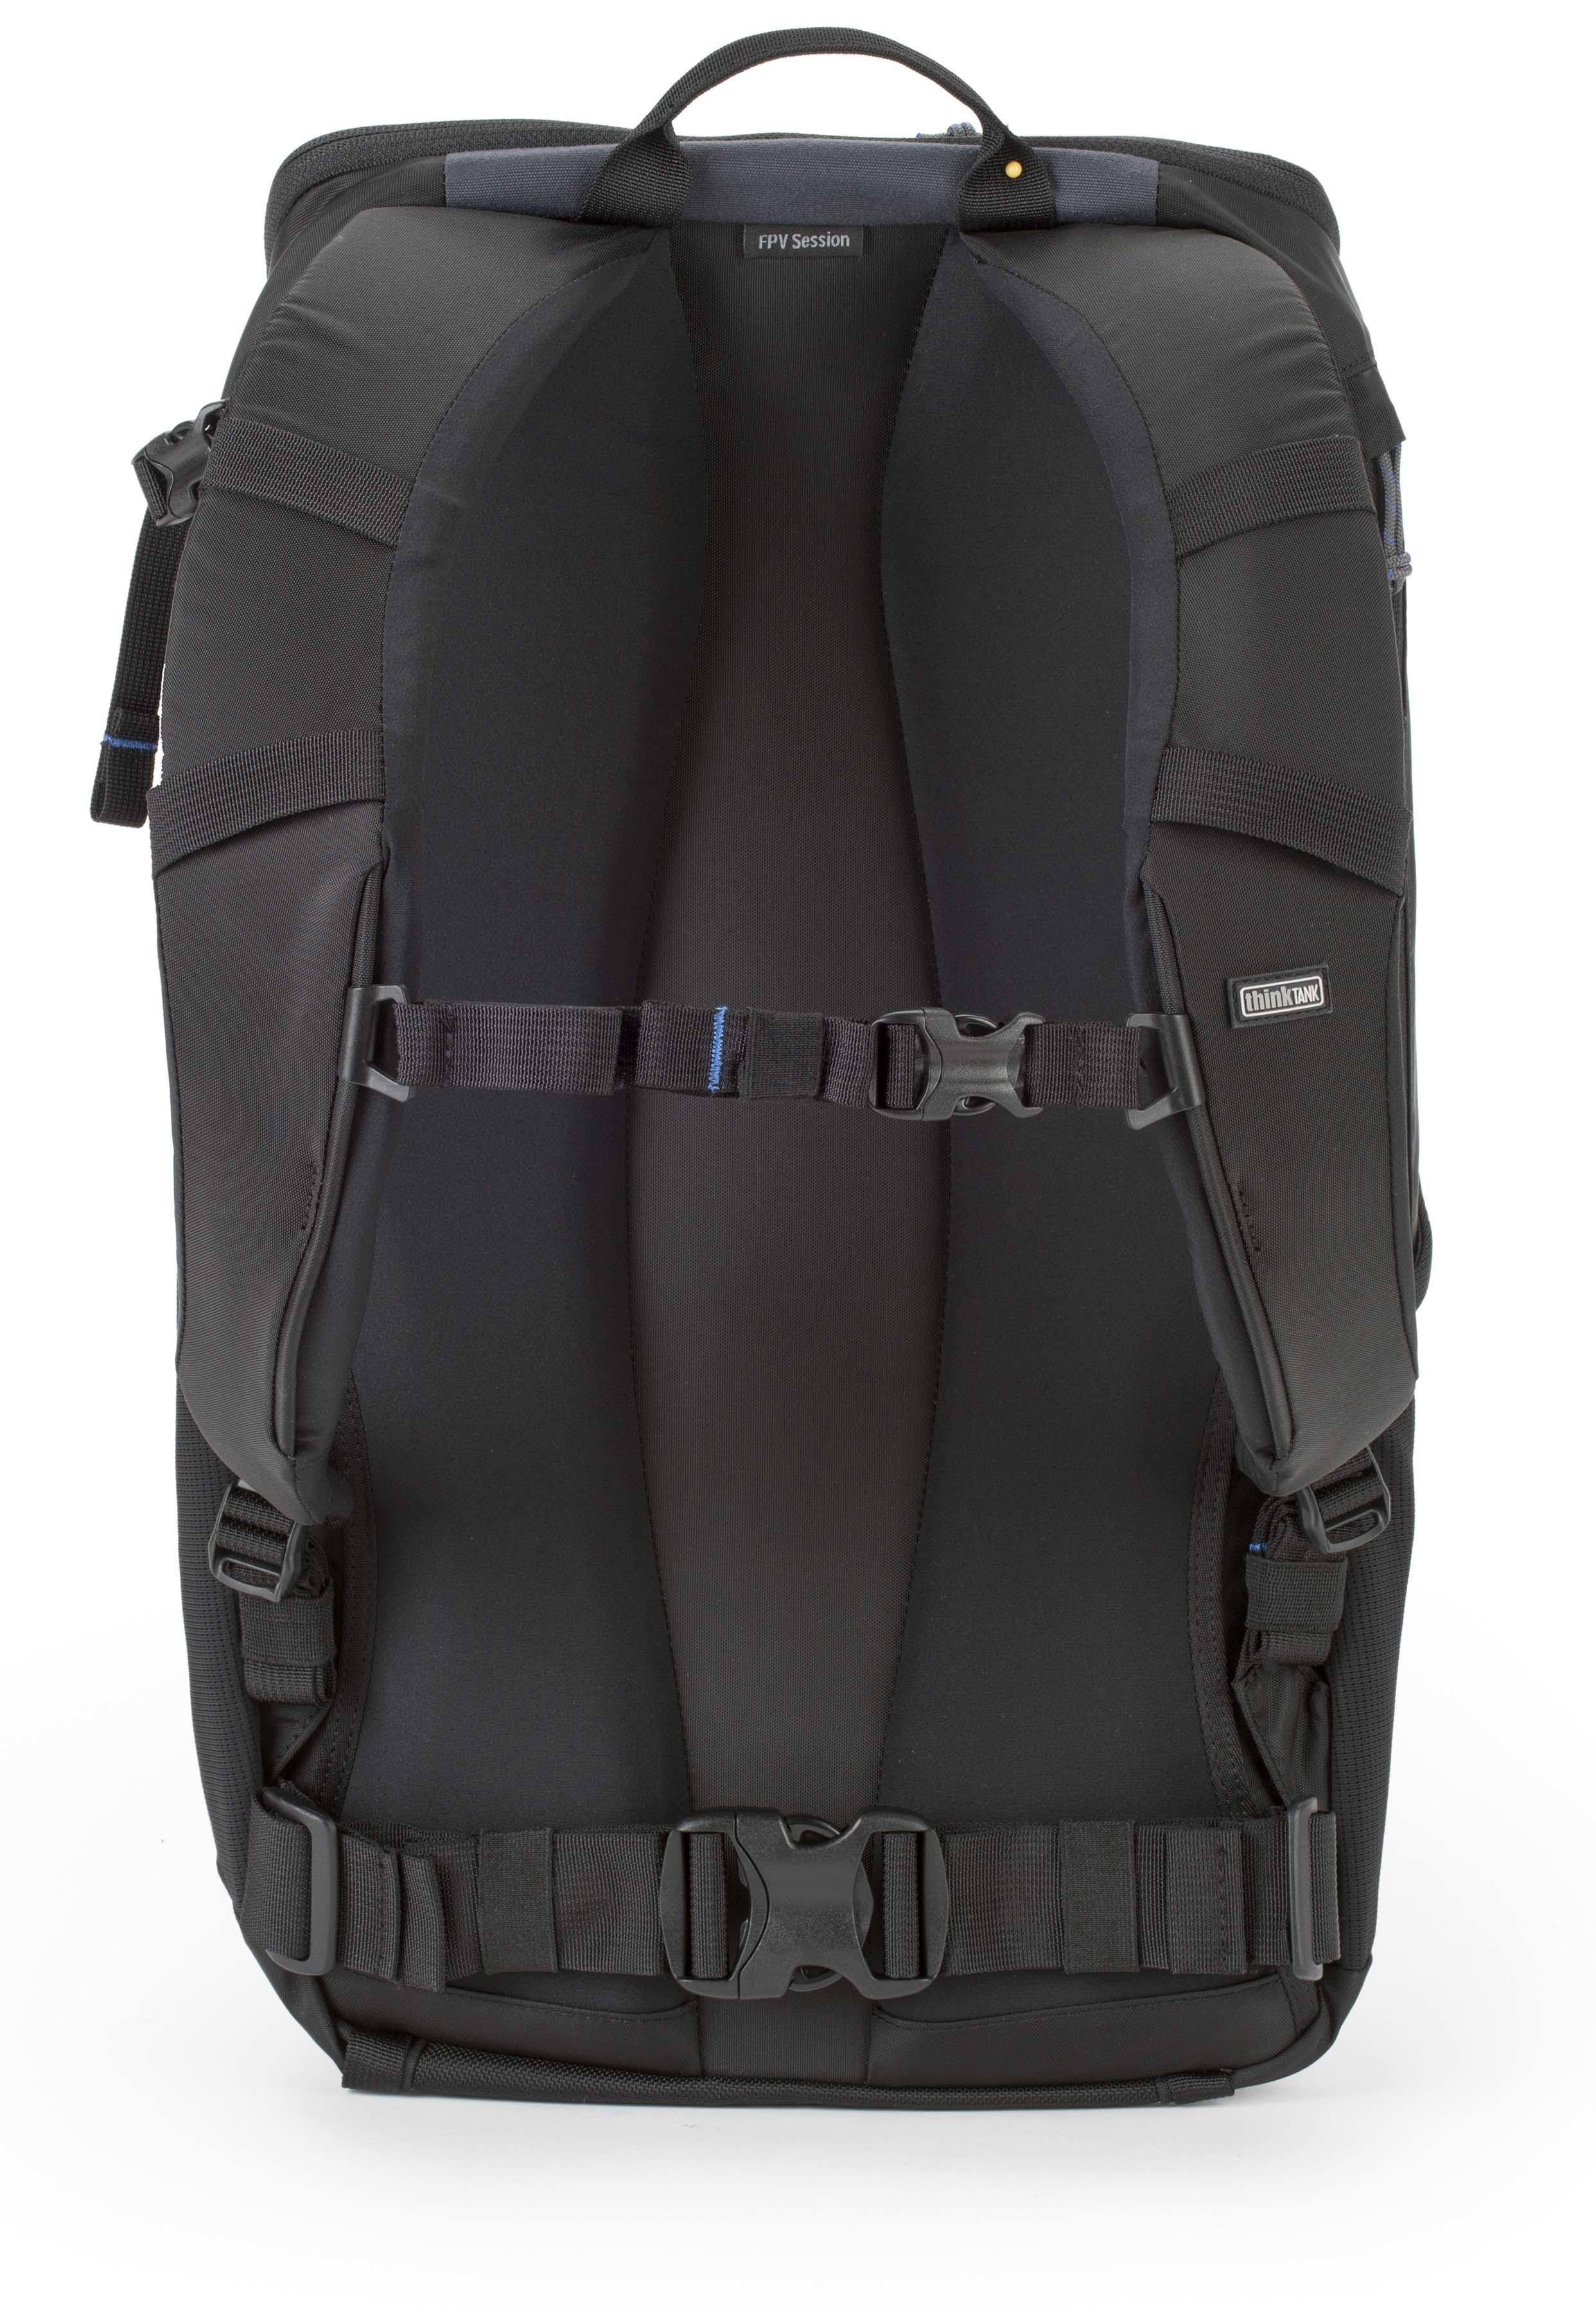 Think Tank Photo FPV Session Backpack